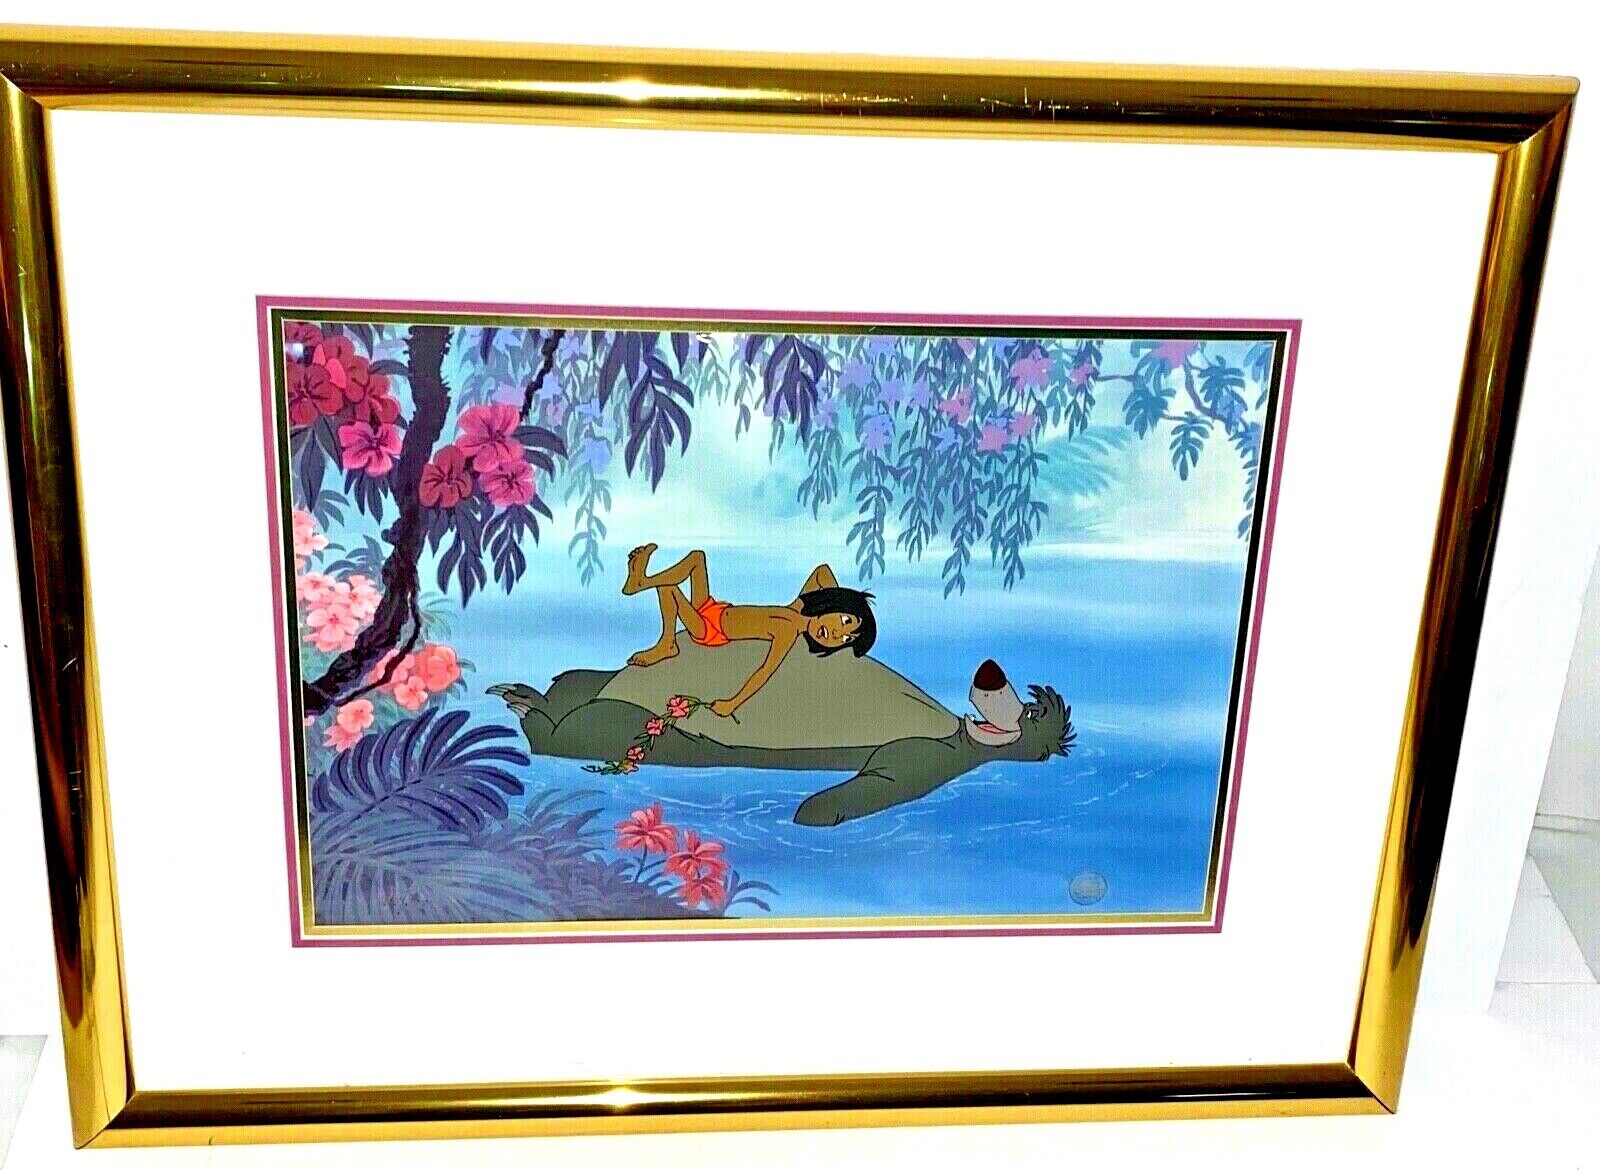 Disney Cel Jungle Book Floating Down The River Animation Art Rare Edition Cell